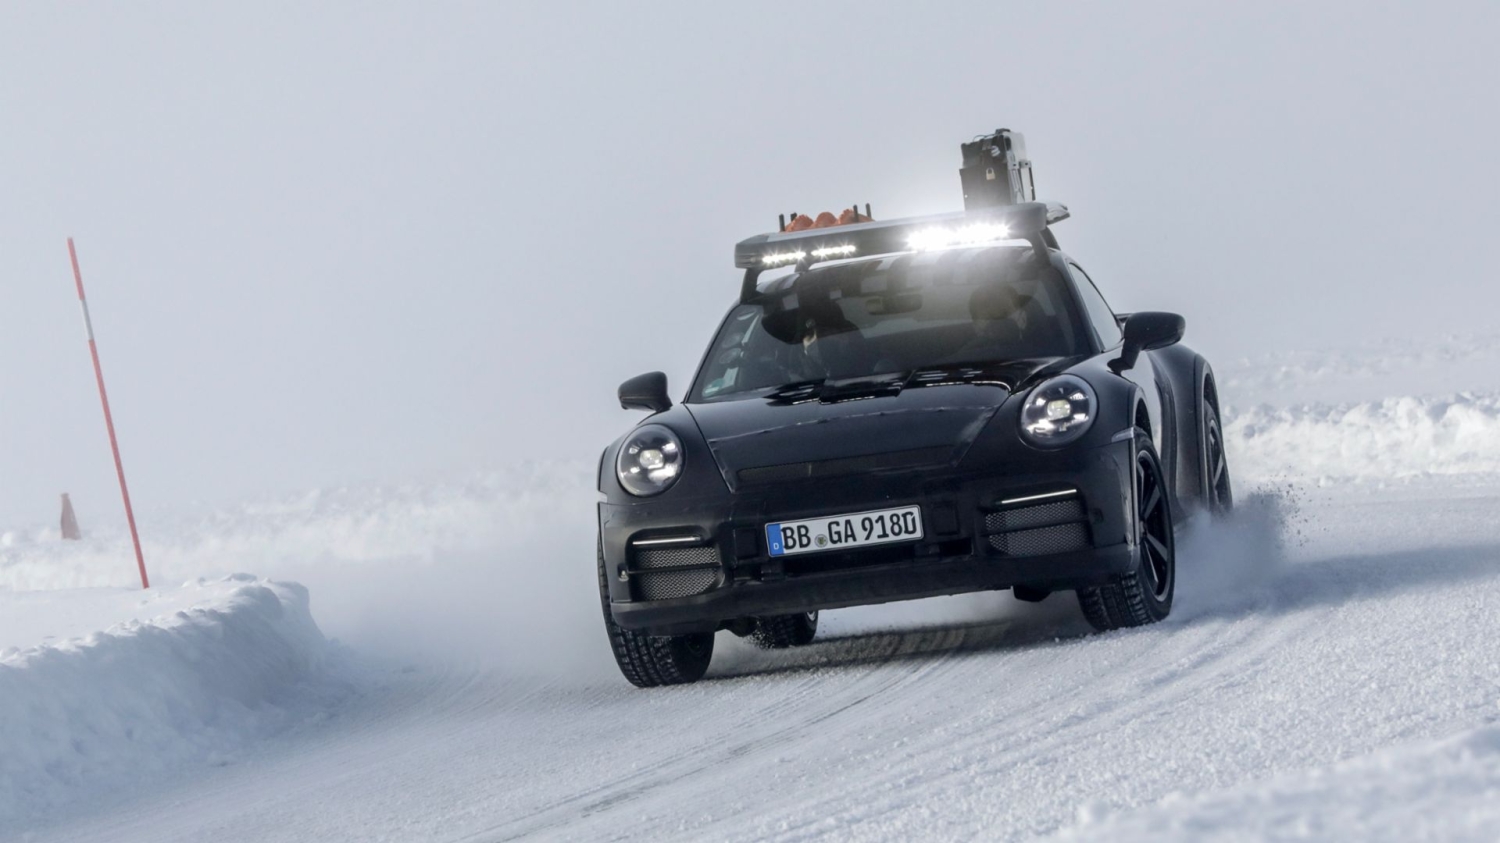 Porsche 911 Dakar shows what it can do on gravel, sand and snow